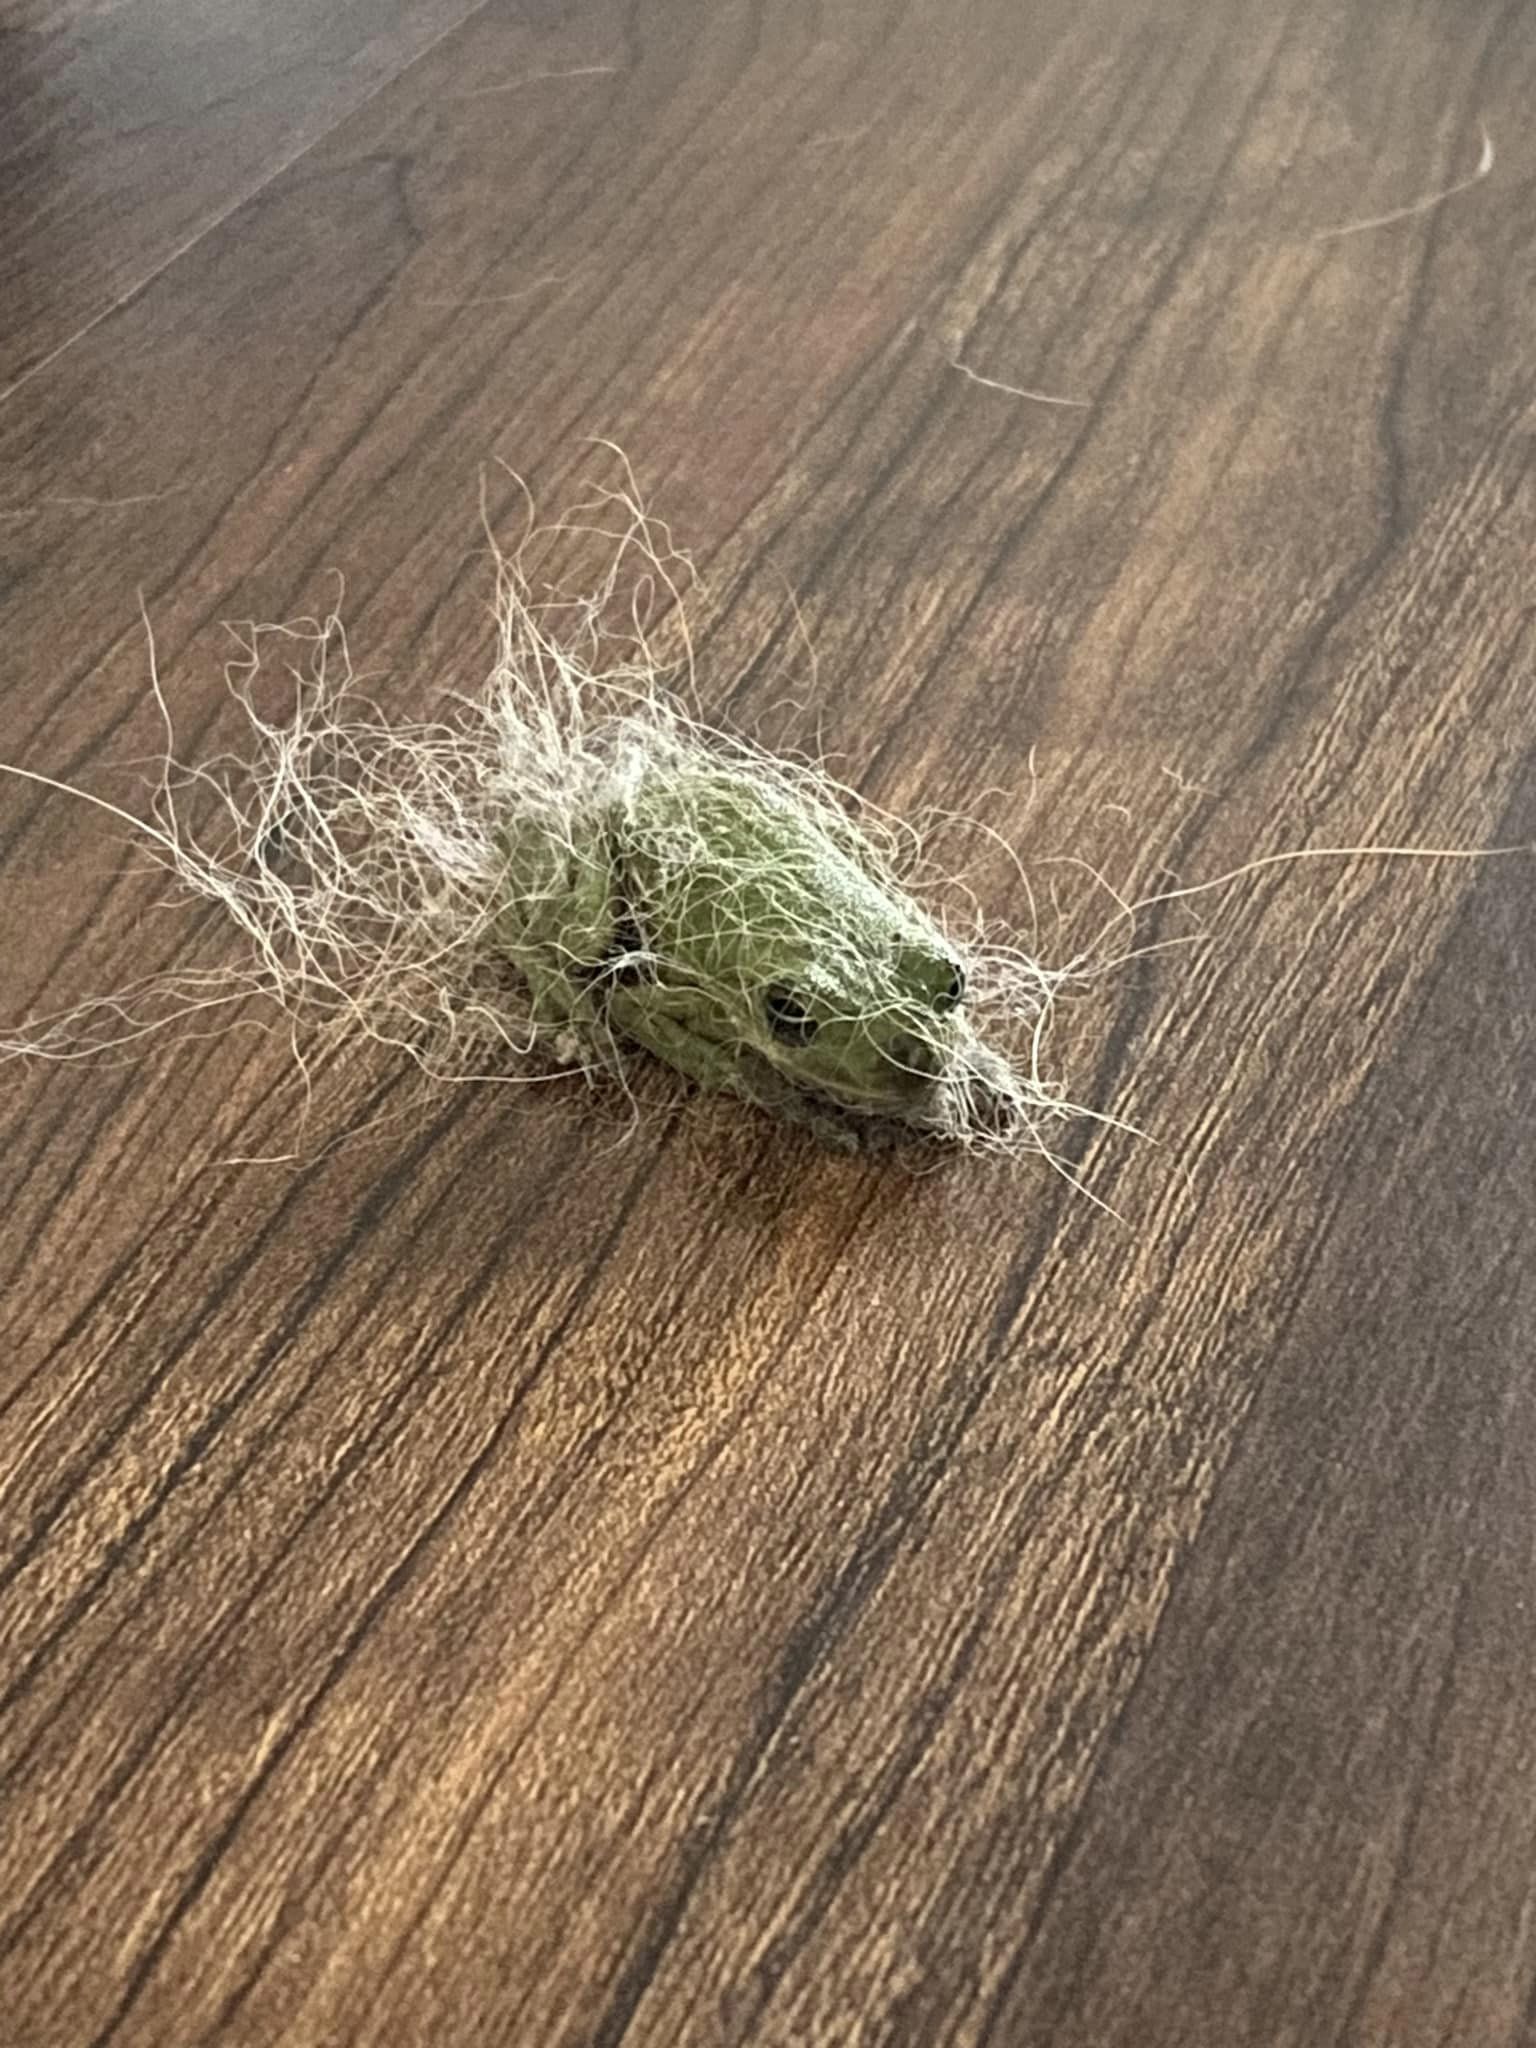 frog in a dogs fur